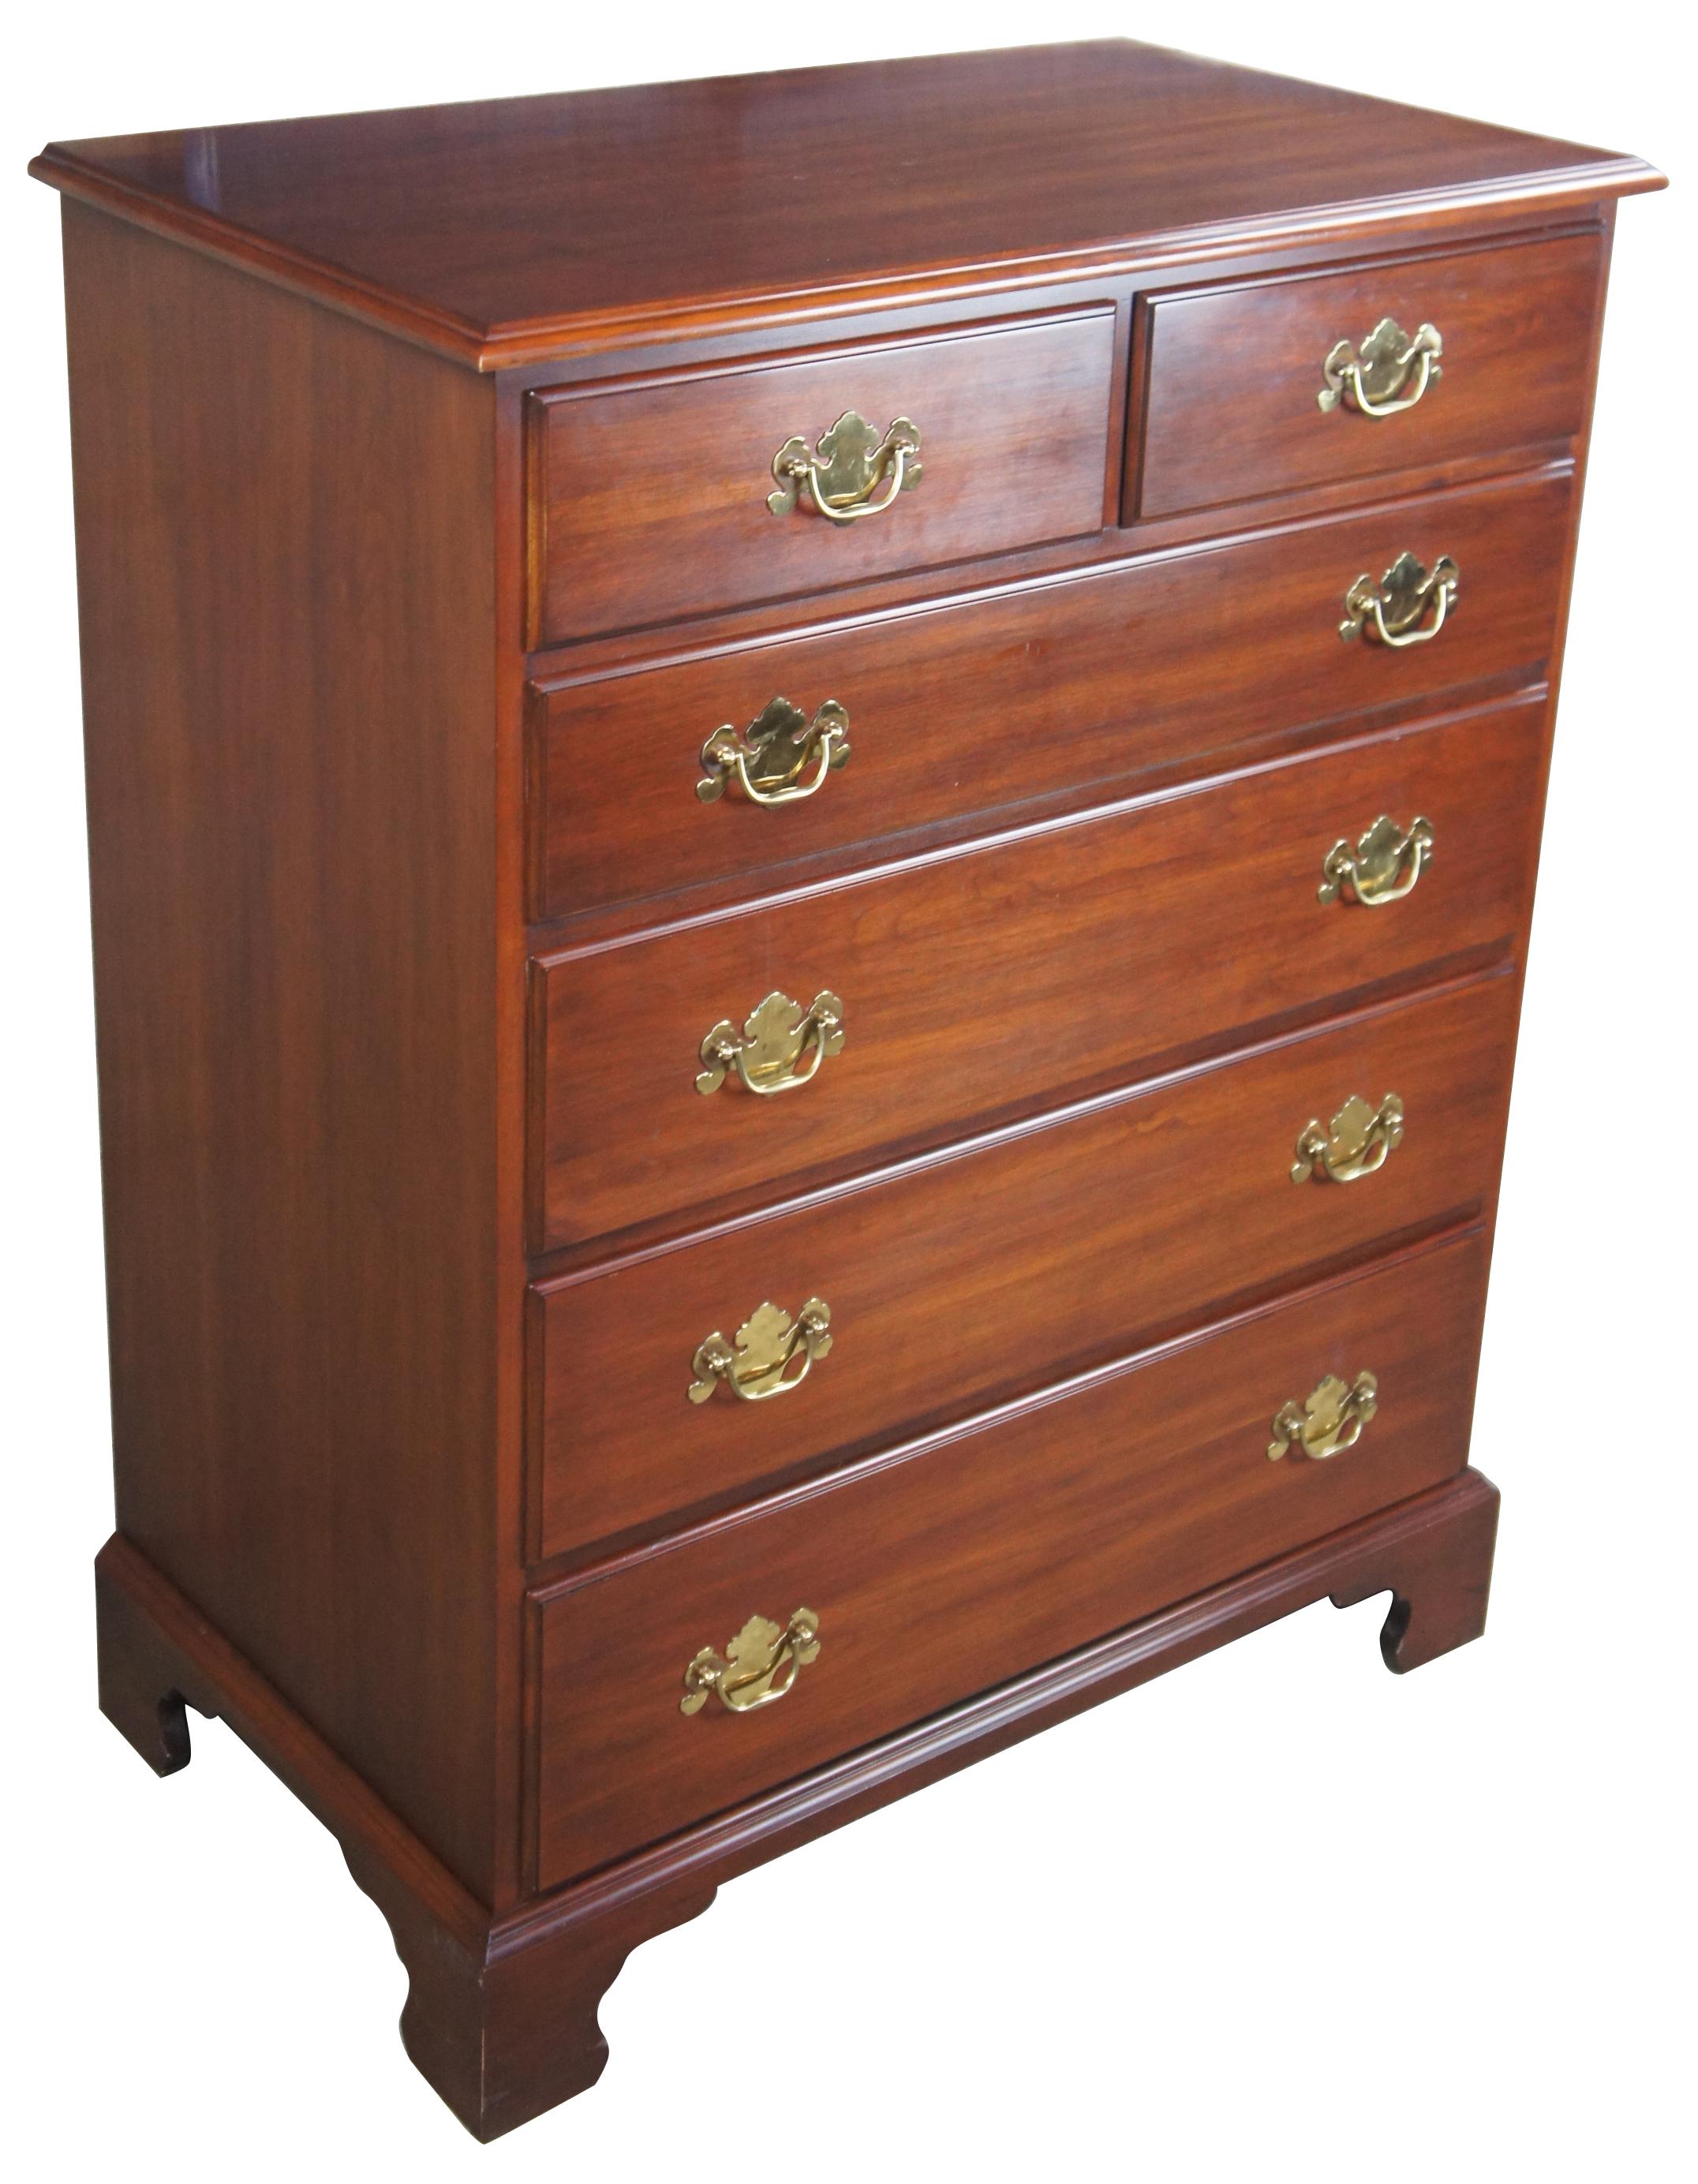 1982 Henkel Harris wild black cherry Chippendale tallboy dresser chest drawers

Henkel Harris wild black cherry two over four-drawer dresser, circa 1892. Chippendale style with brass hardware and block feet. Finish #24, style #115, from shop